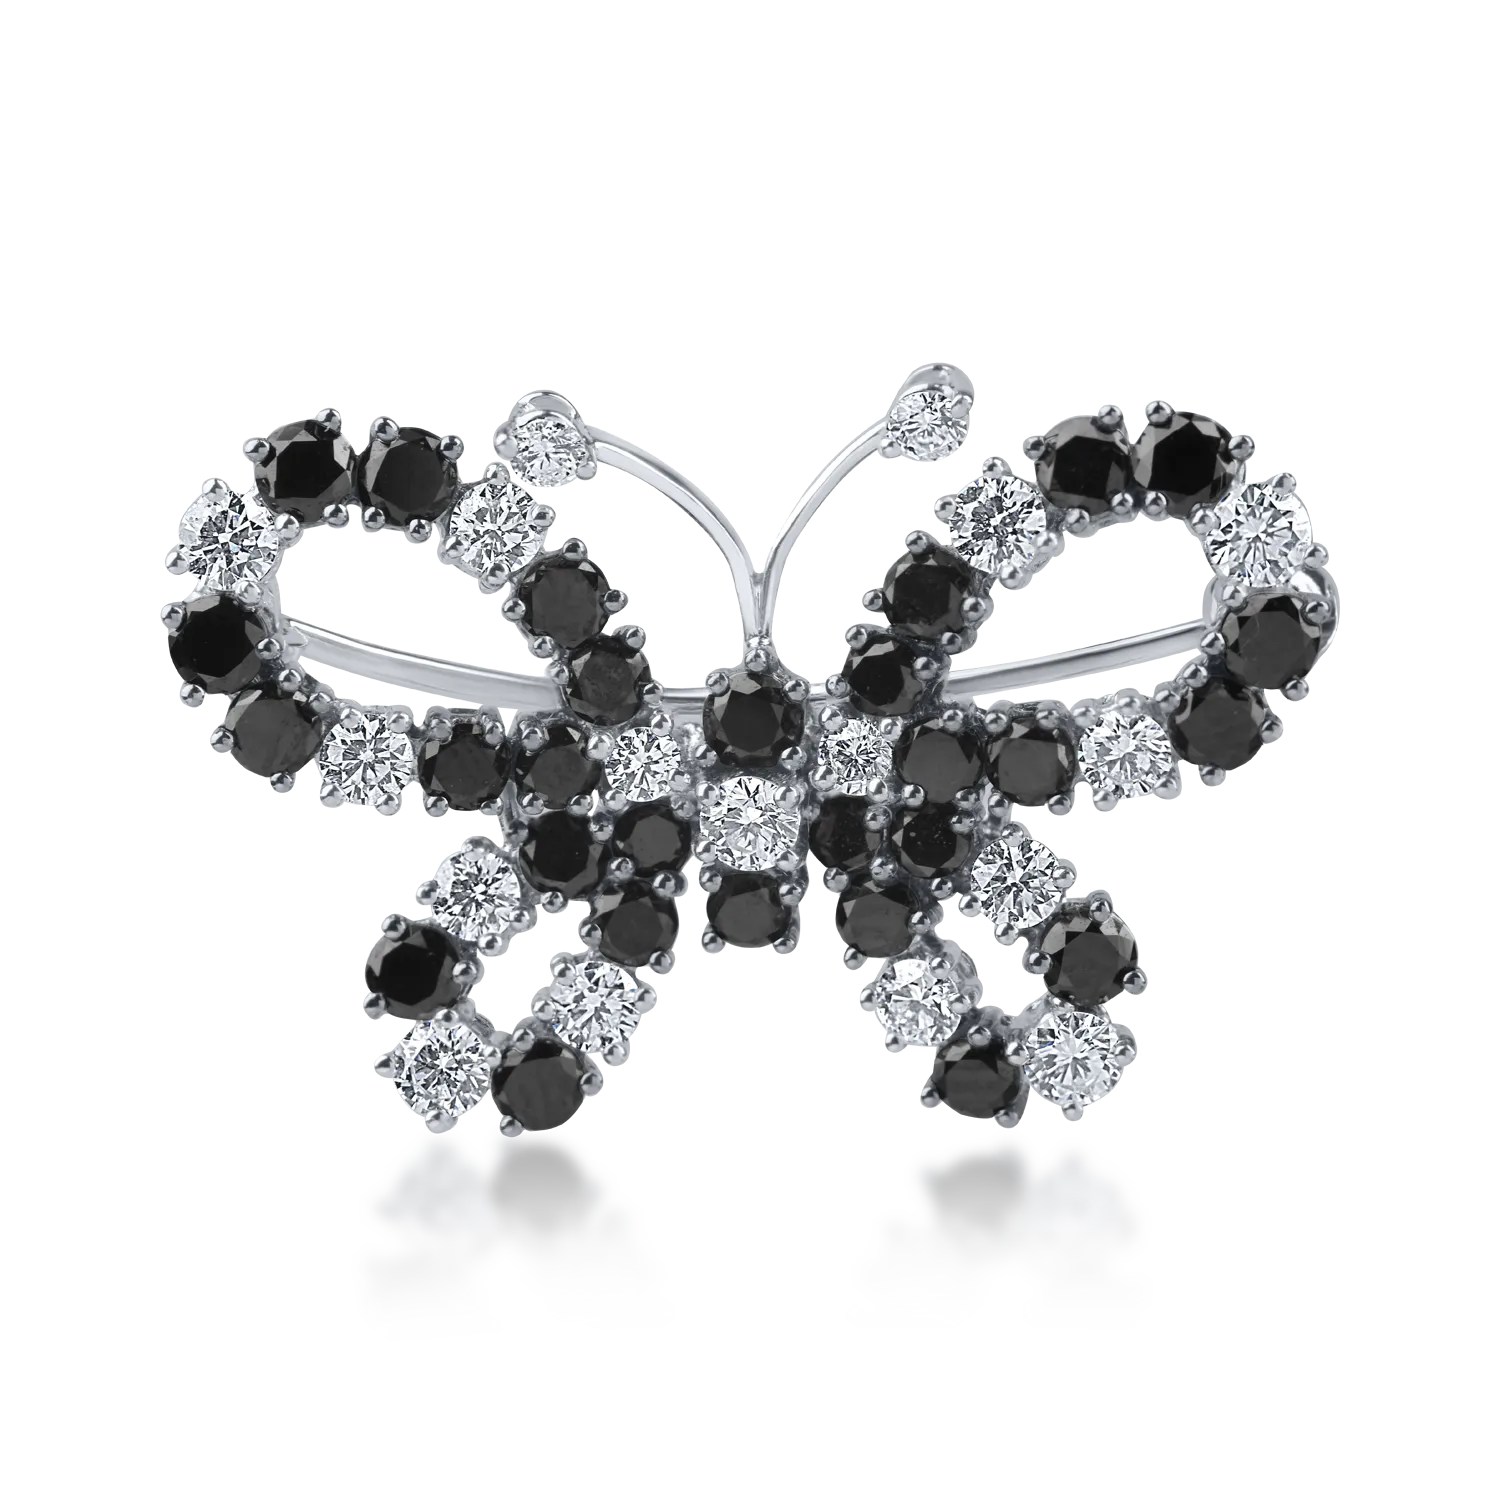 White gold butterfly brooch with 1.3ct black diamonds and 0.7ct clear diamonds